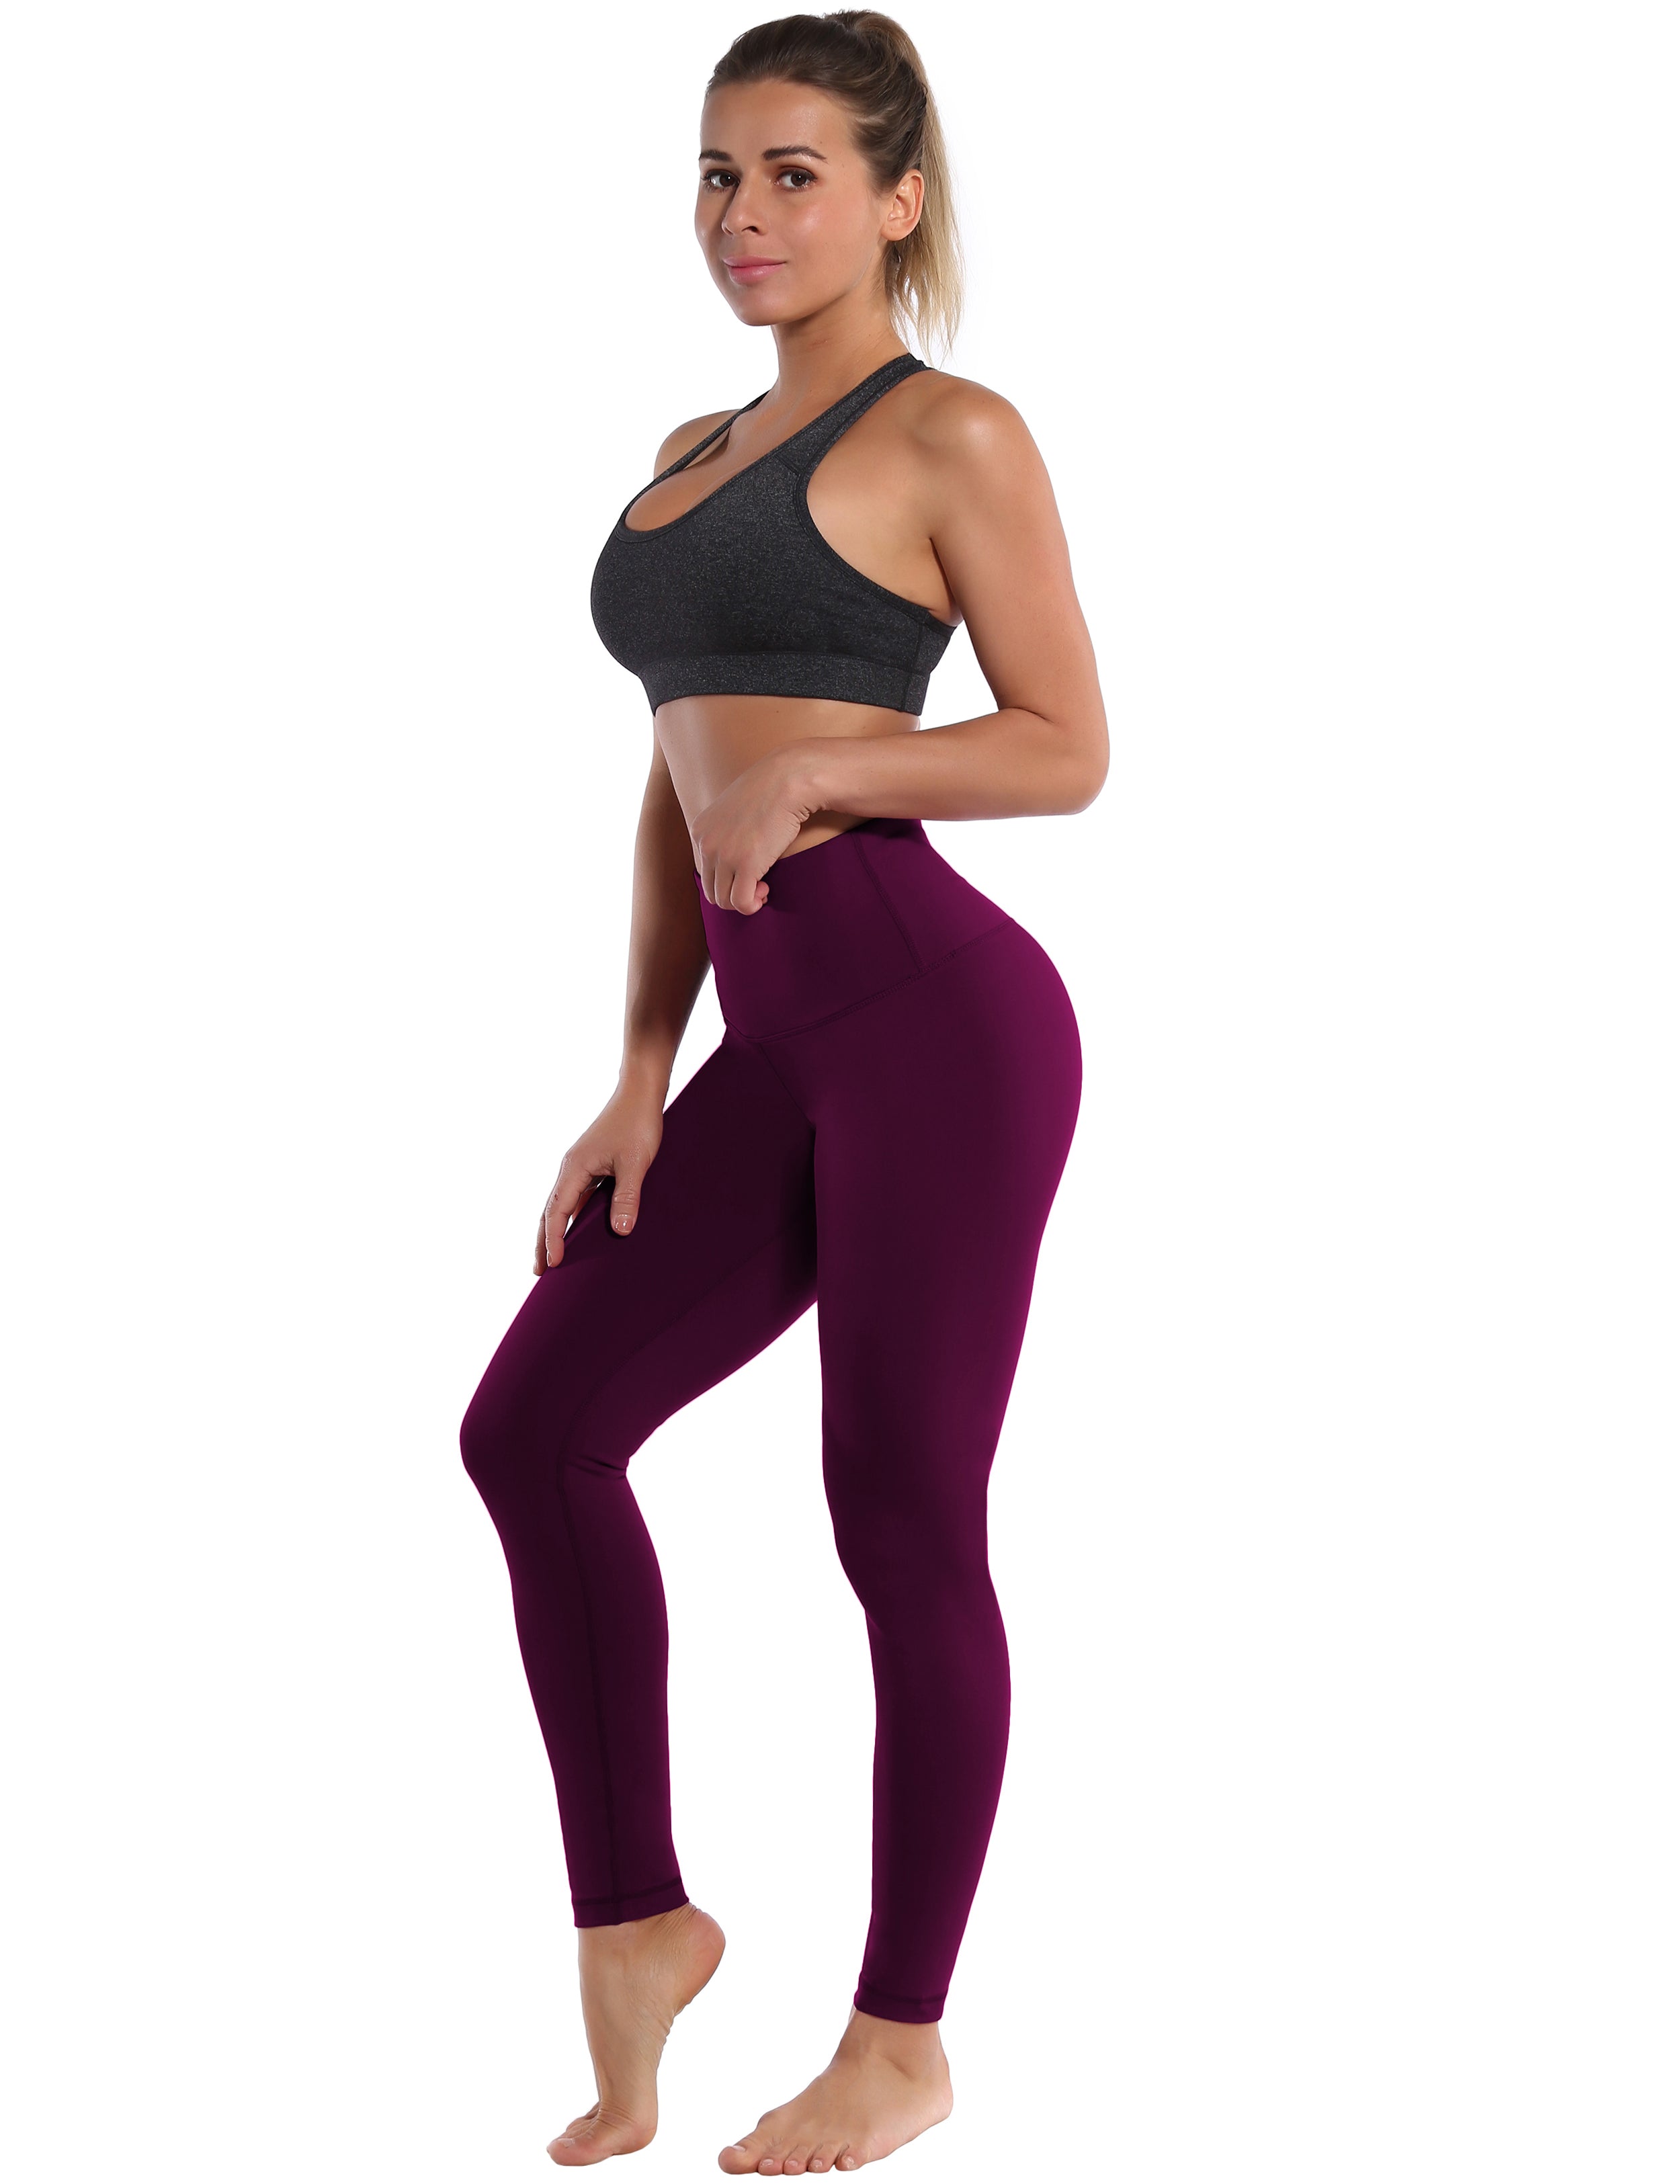 High Waist Gym Pants grapevine 75%Nylon/25%Spandex Fabric doesn't attract lint easily 4-way stretch No see-through Moisture-wicking Tummy control Inner pocket Four lengths